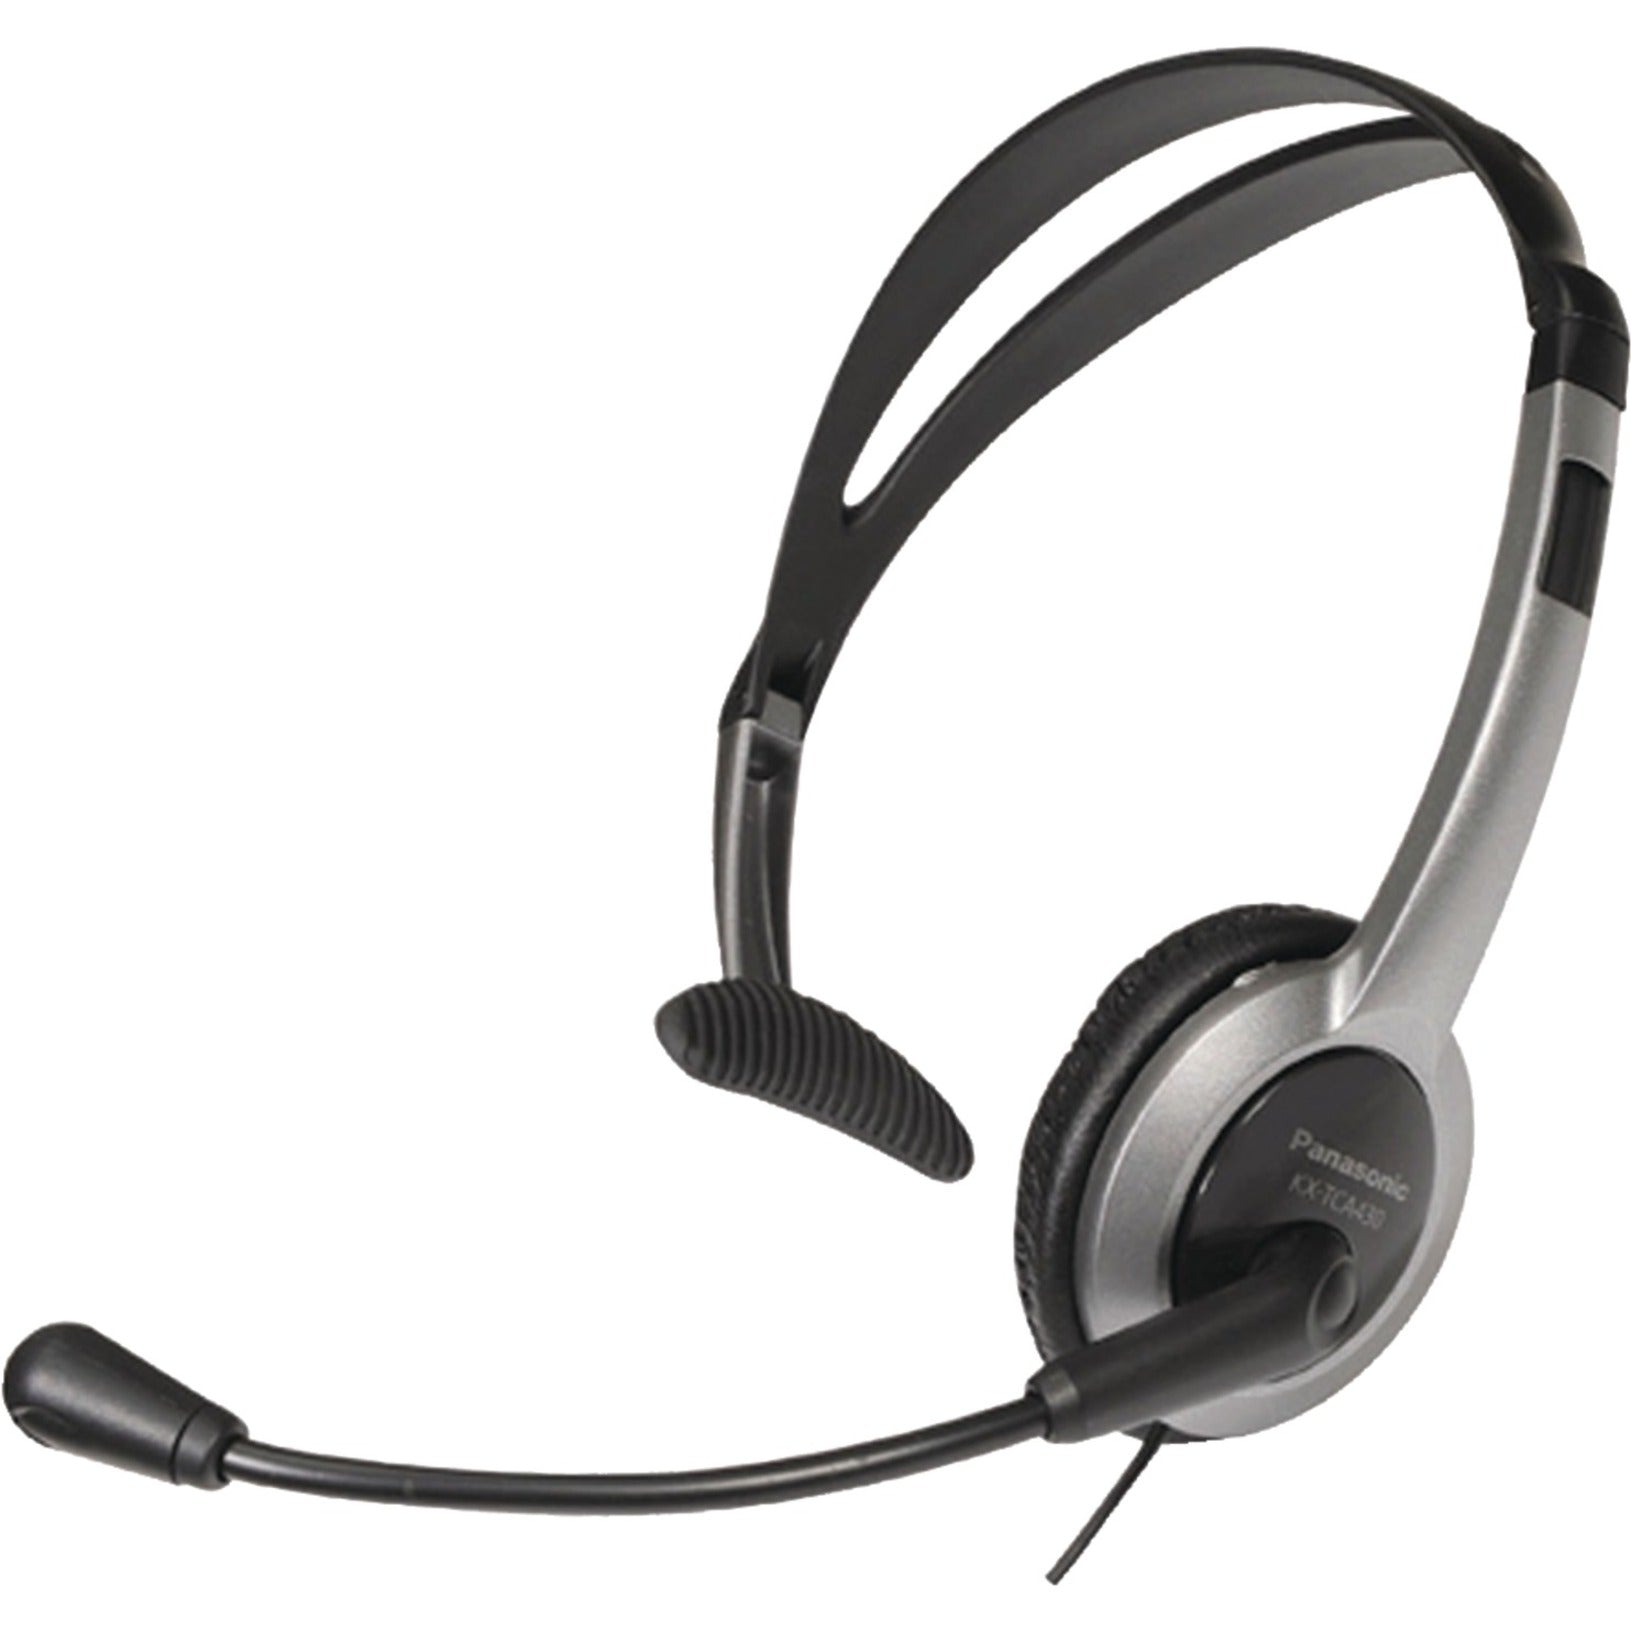 Panasonic KX-TCA430 Headset/Earset, Monaural Over-the-head, Noise Cancelling, 90 Day Warranty